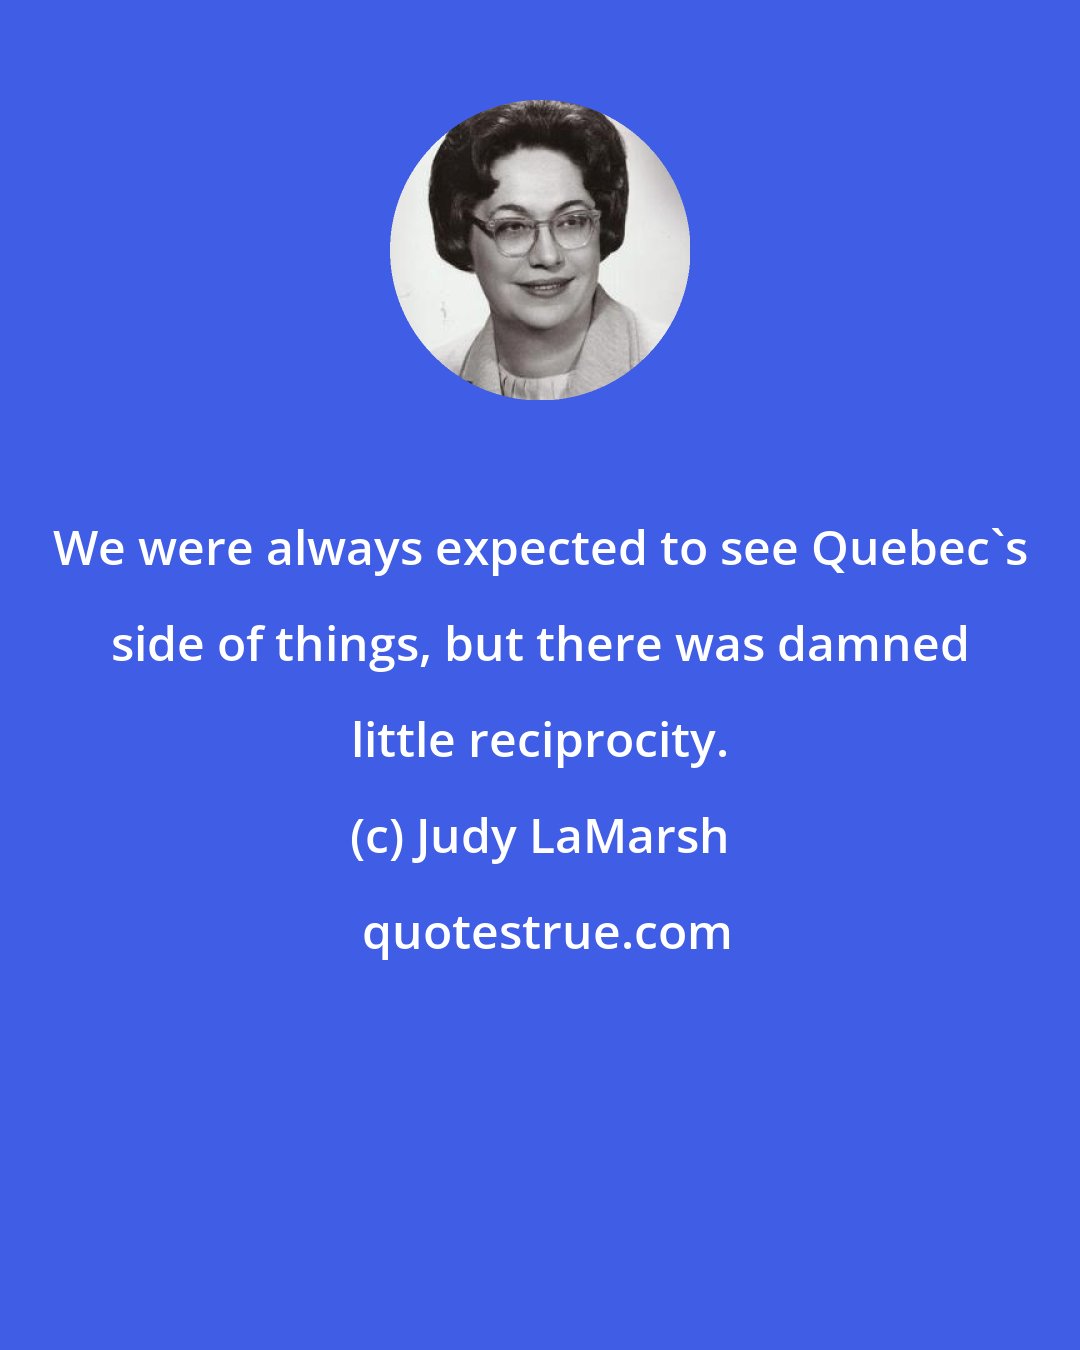 Judy LaMarsh: We were always expected to see Quebec's side of things, but there was damned little reciprocity.